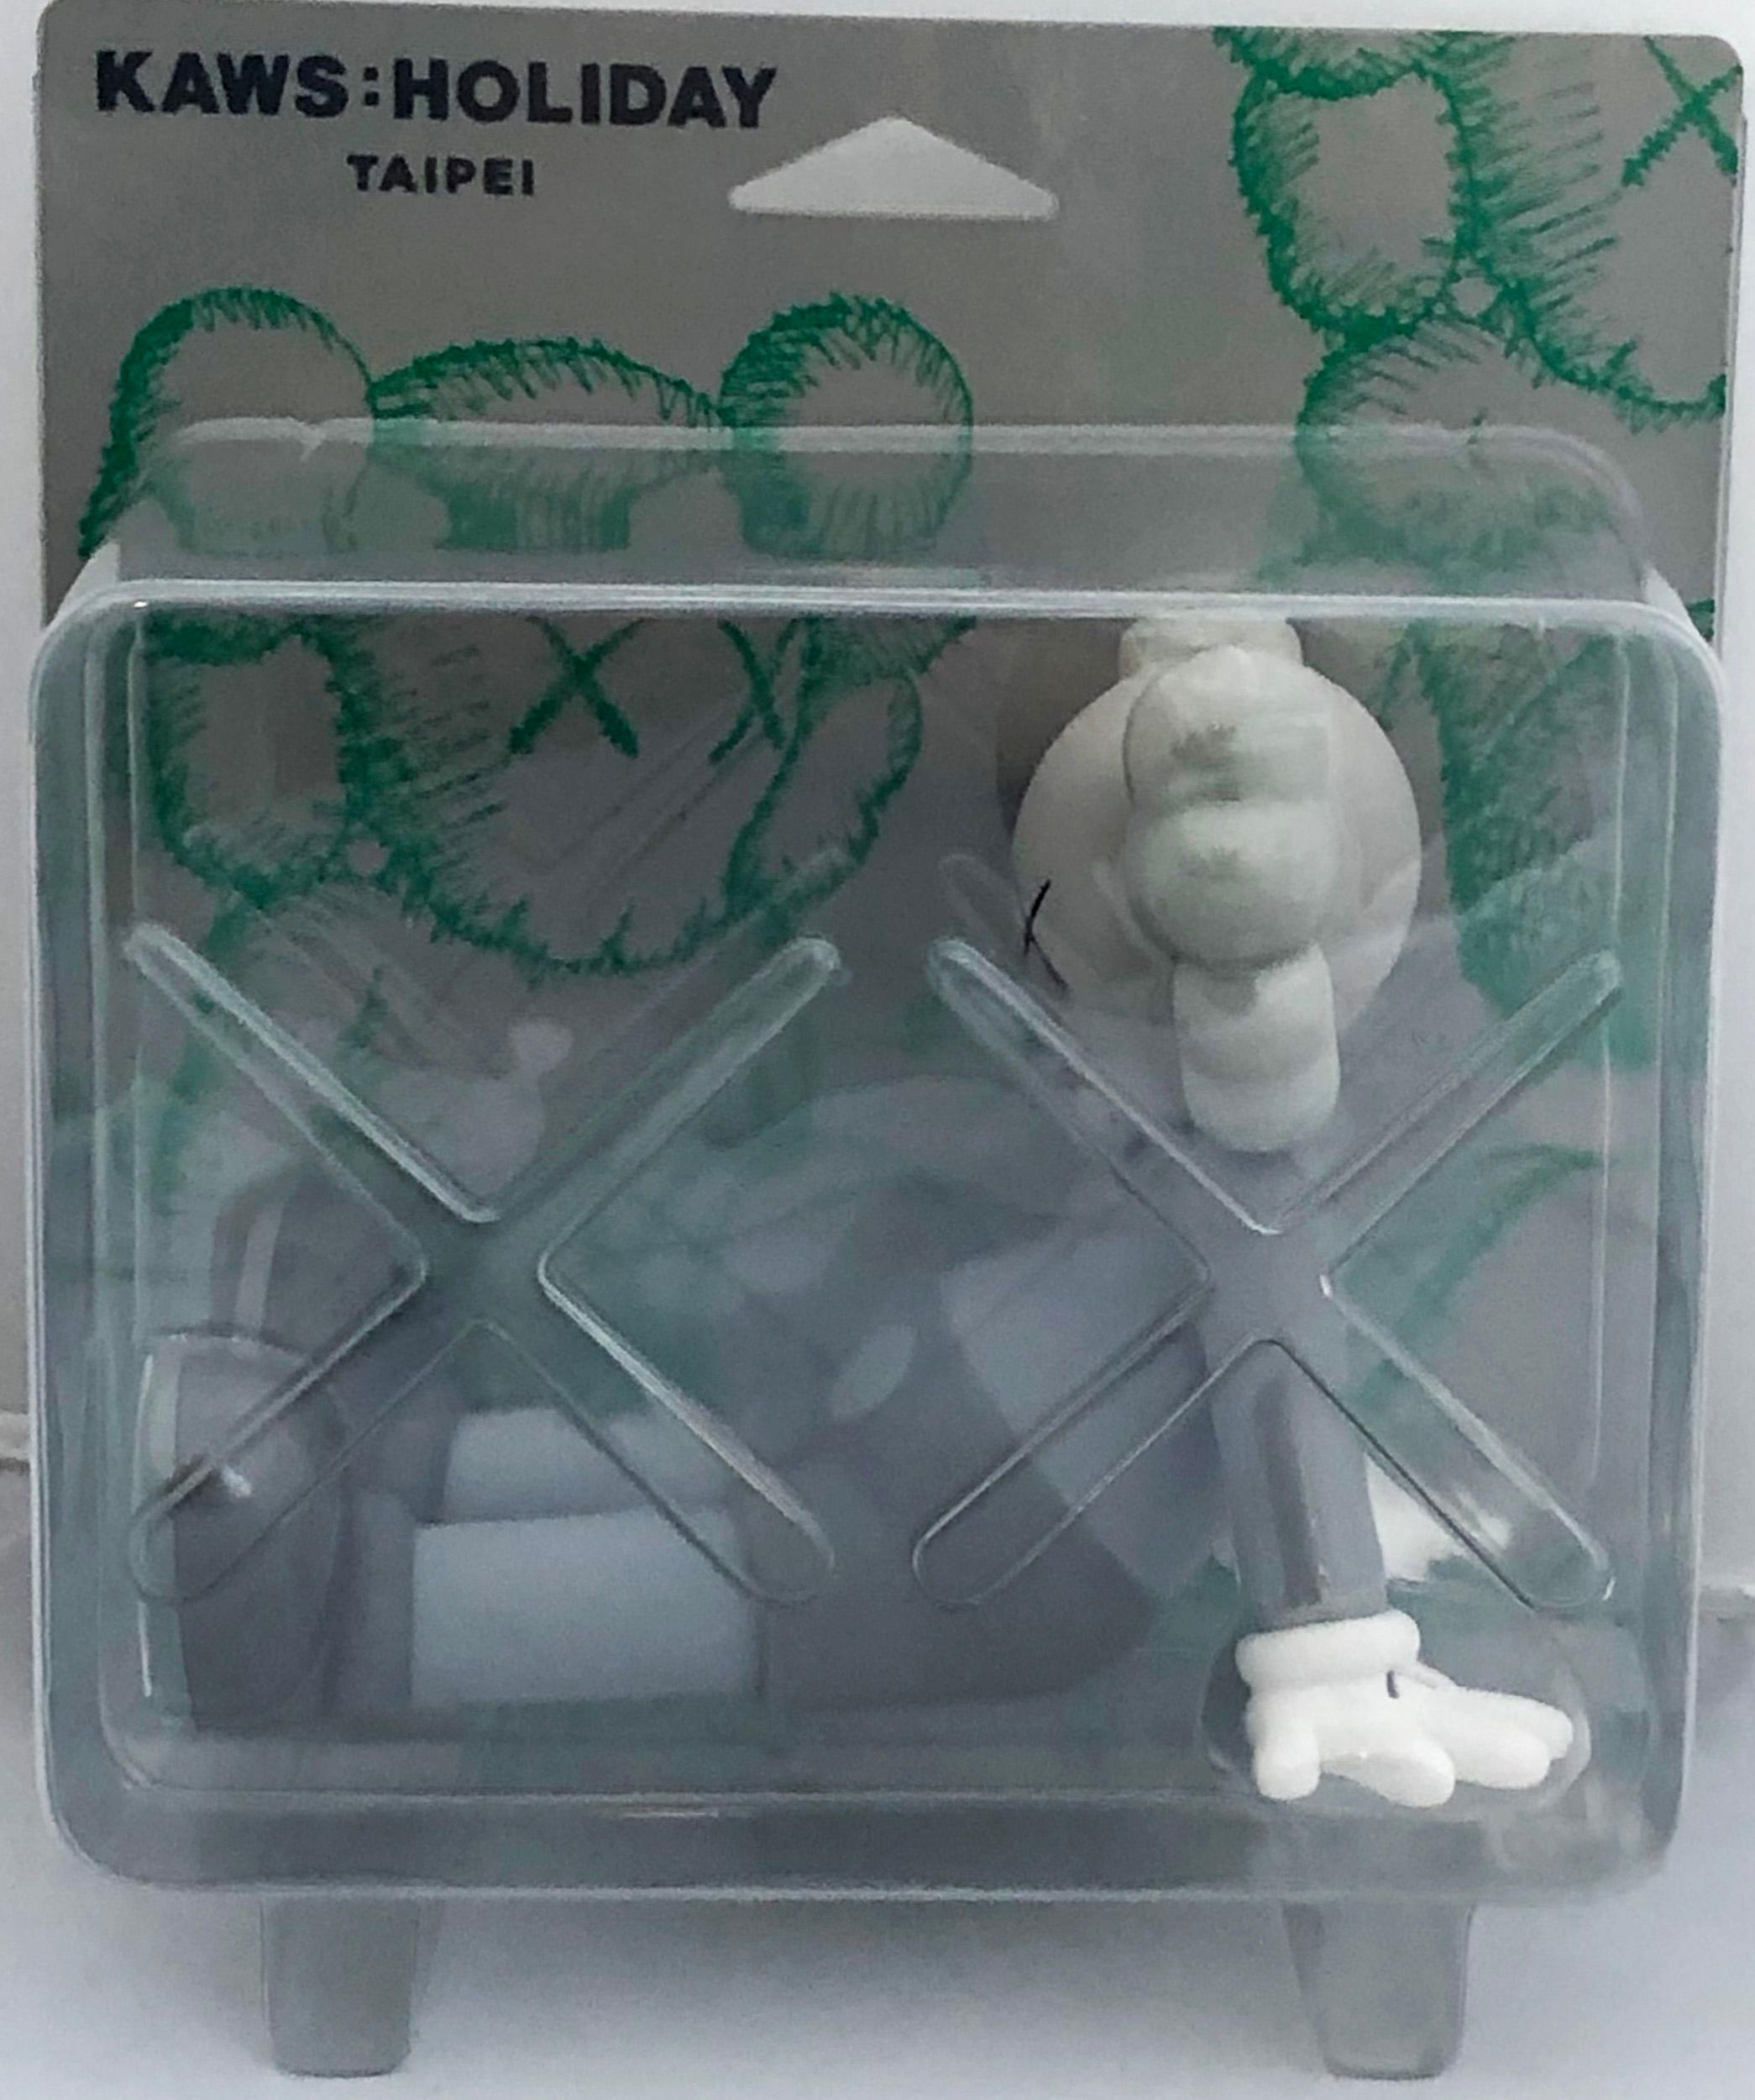 KAWS Grey Holiday Companion (KAWS Taipei): 
This figurine features KAWS' signature character COMPANION in a resting seated position. This figurine was published by All Rights Reserved to commemorate the debut of KAWS’ largest sculptural endeavor to